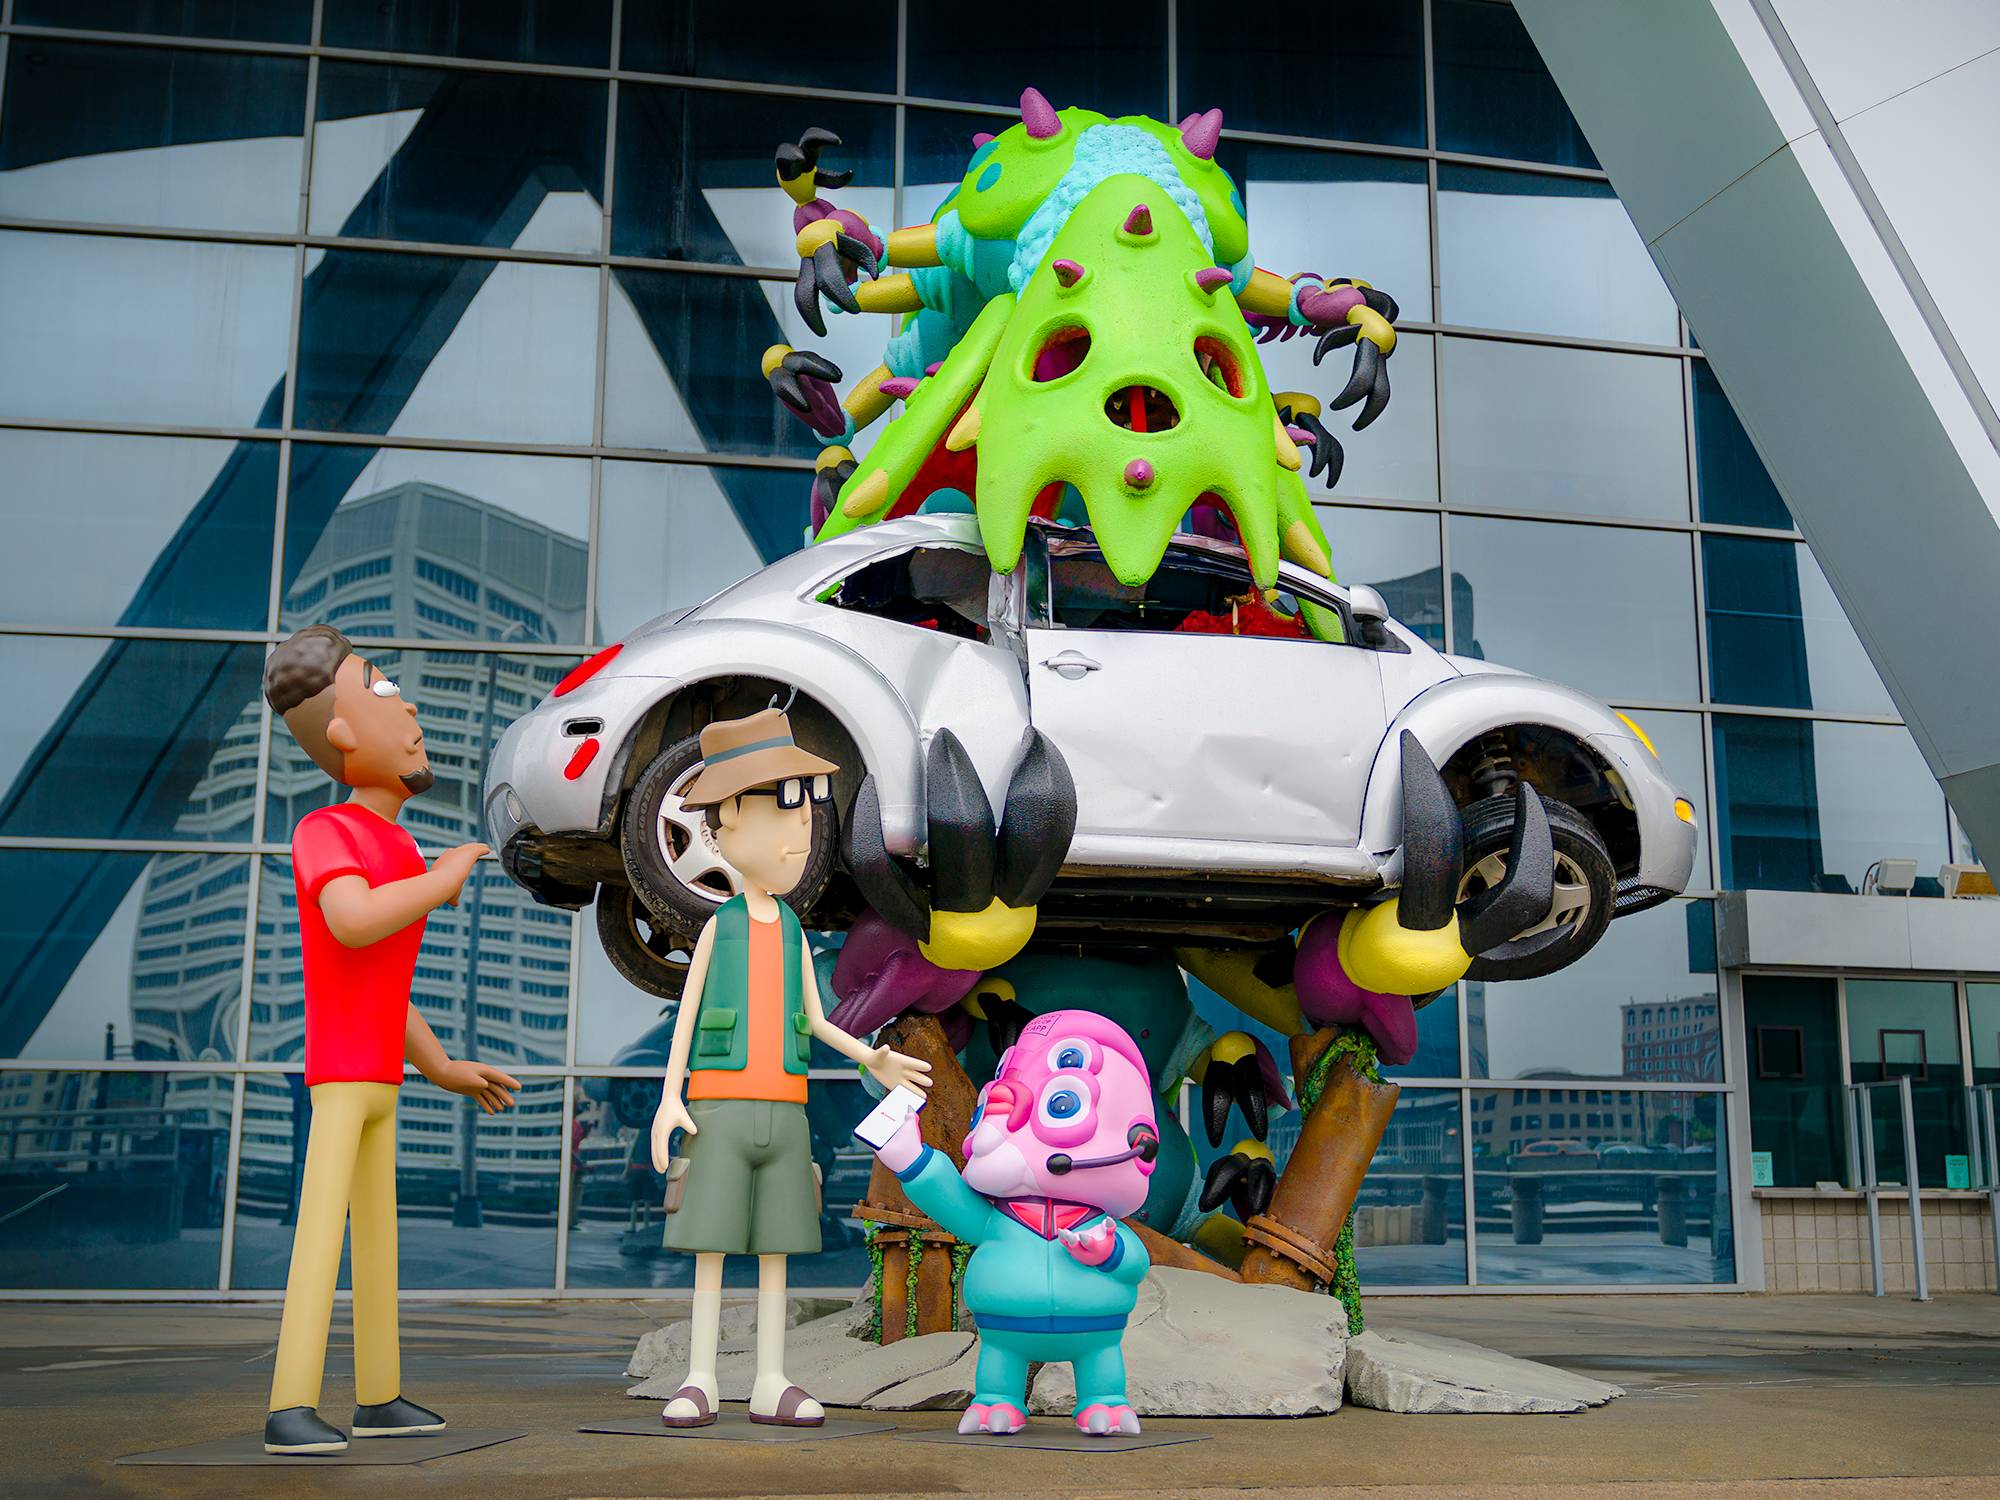 Adult Swims Global Rick and Morty Fan Experience Continues with Latest #Wormageddon Scene in Atlanta Warner Bros